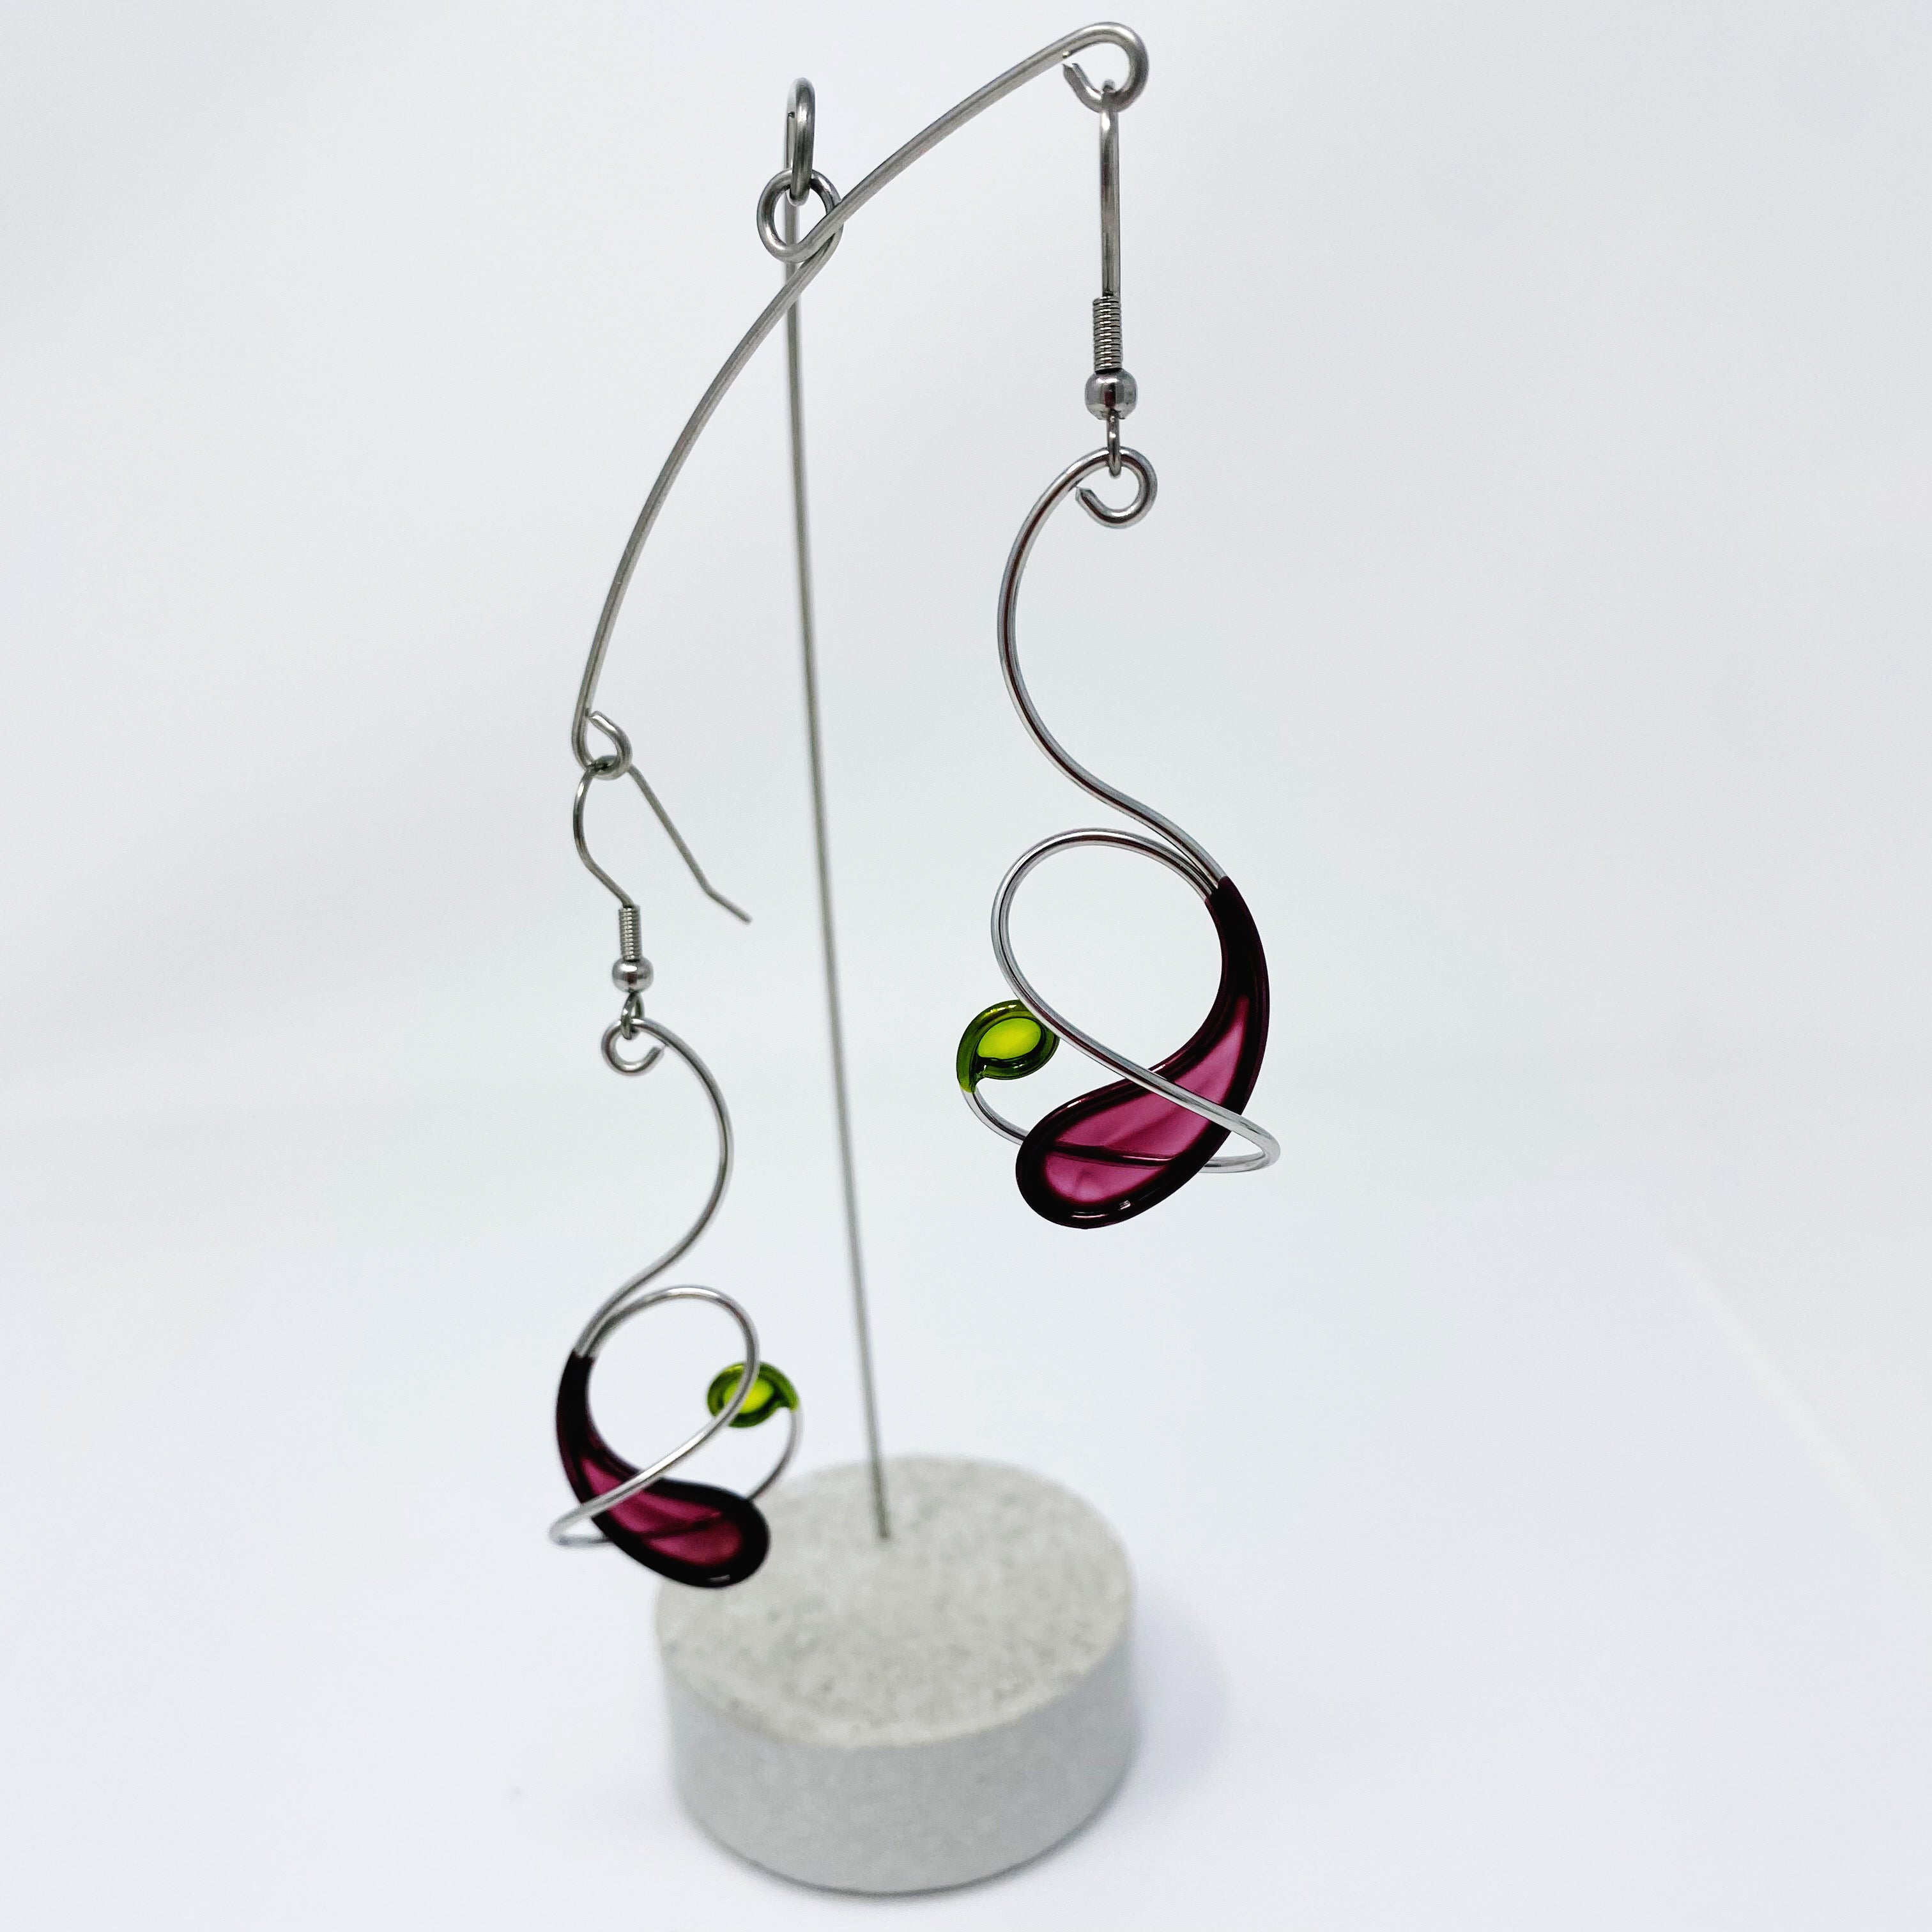 Purple paisley shape with green circle resin and stainless steel earrings